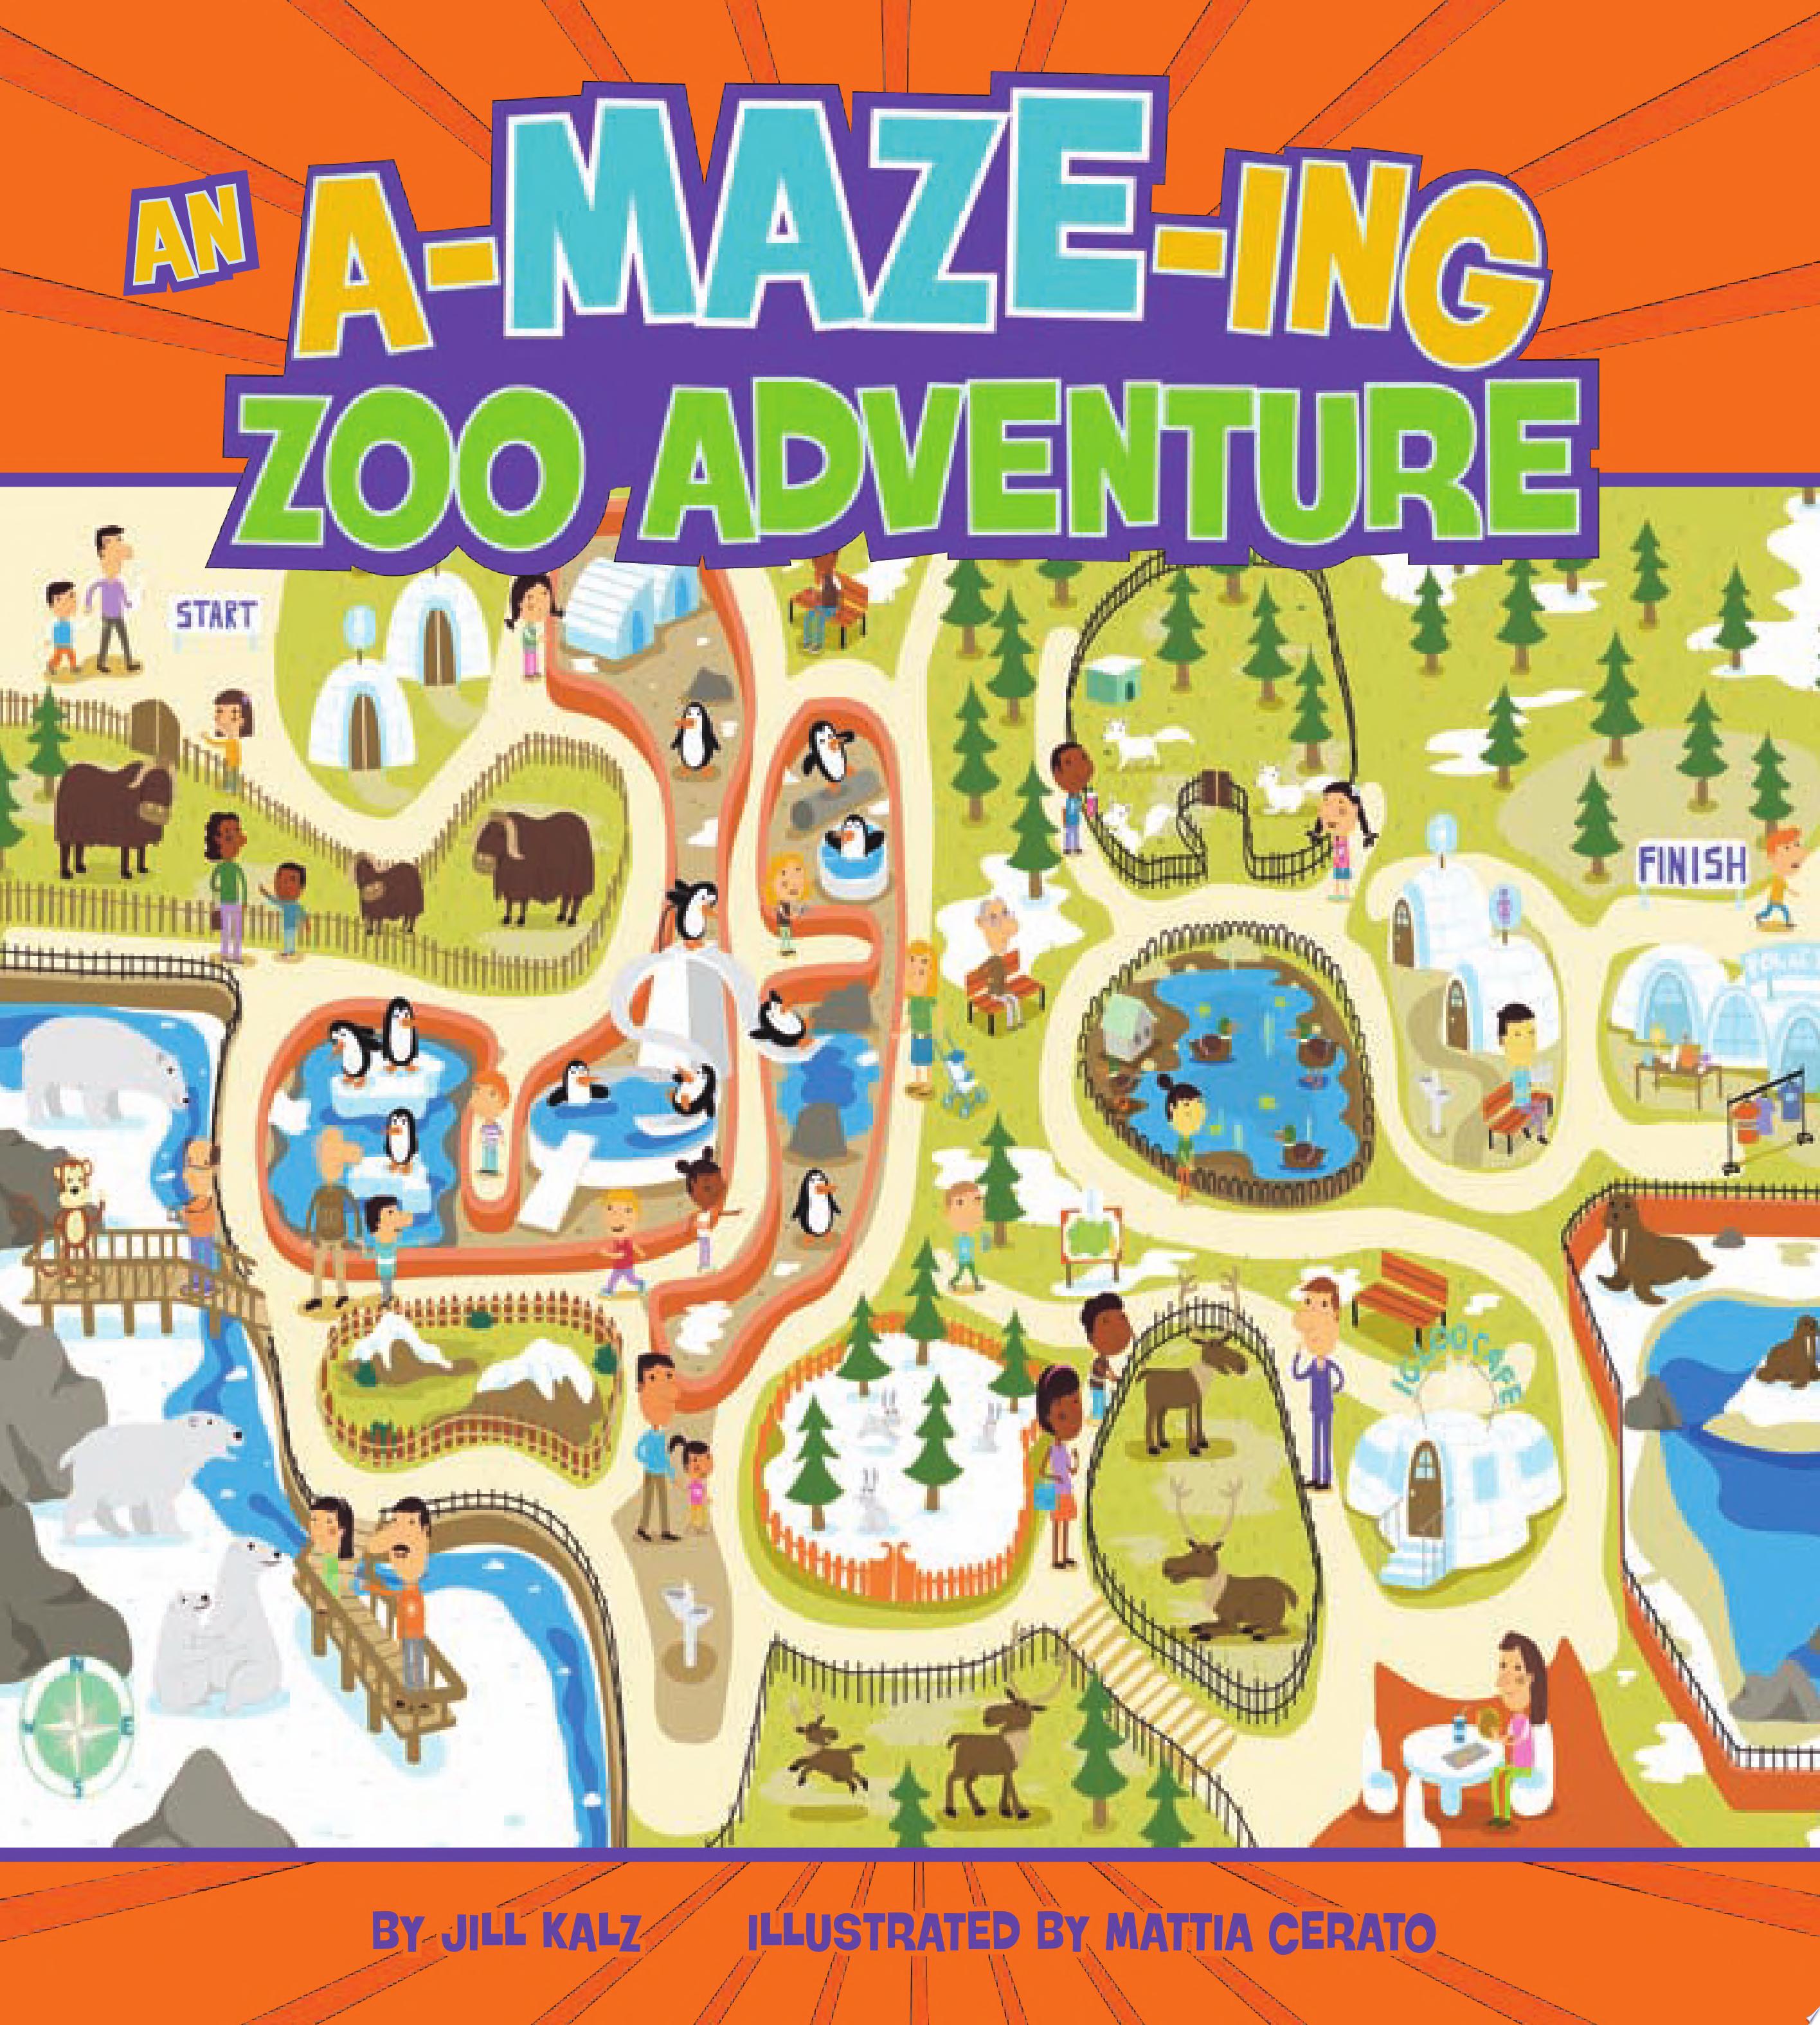 Image for "An A-maze-ing Zoo Adventure"